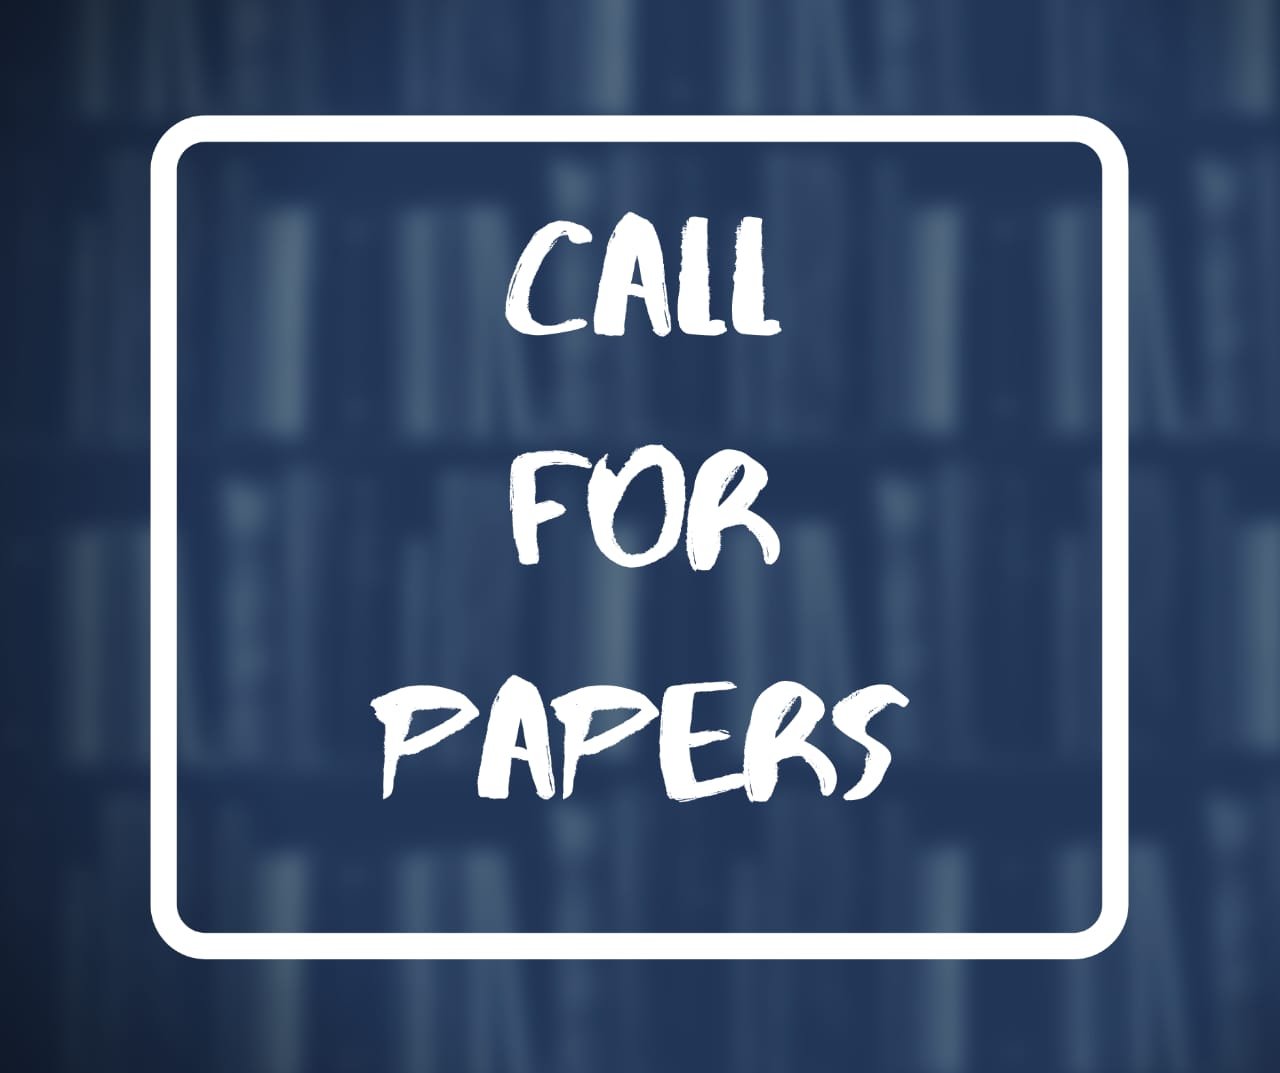 Call for Papers: NUALS, CCLP NUALS Newsletter (Submit by 15 Oct)